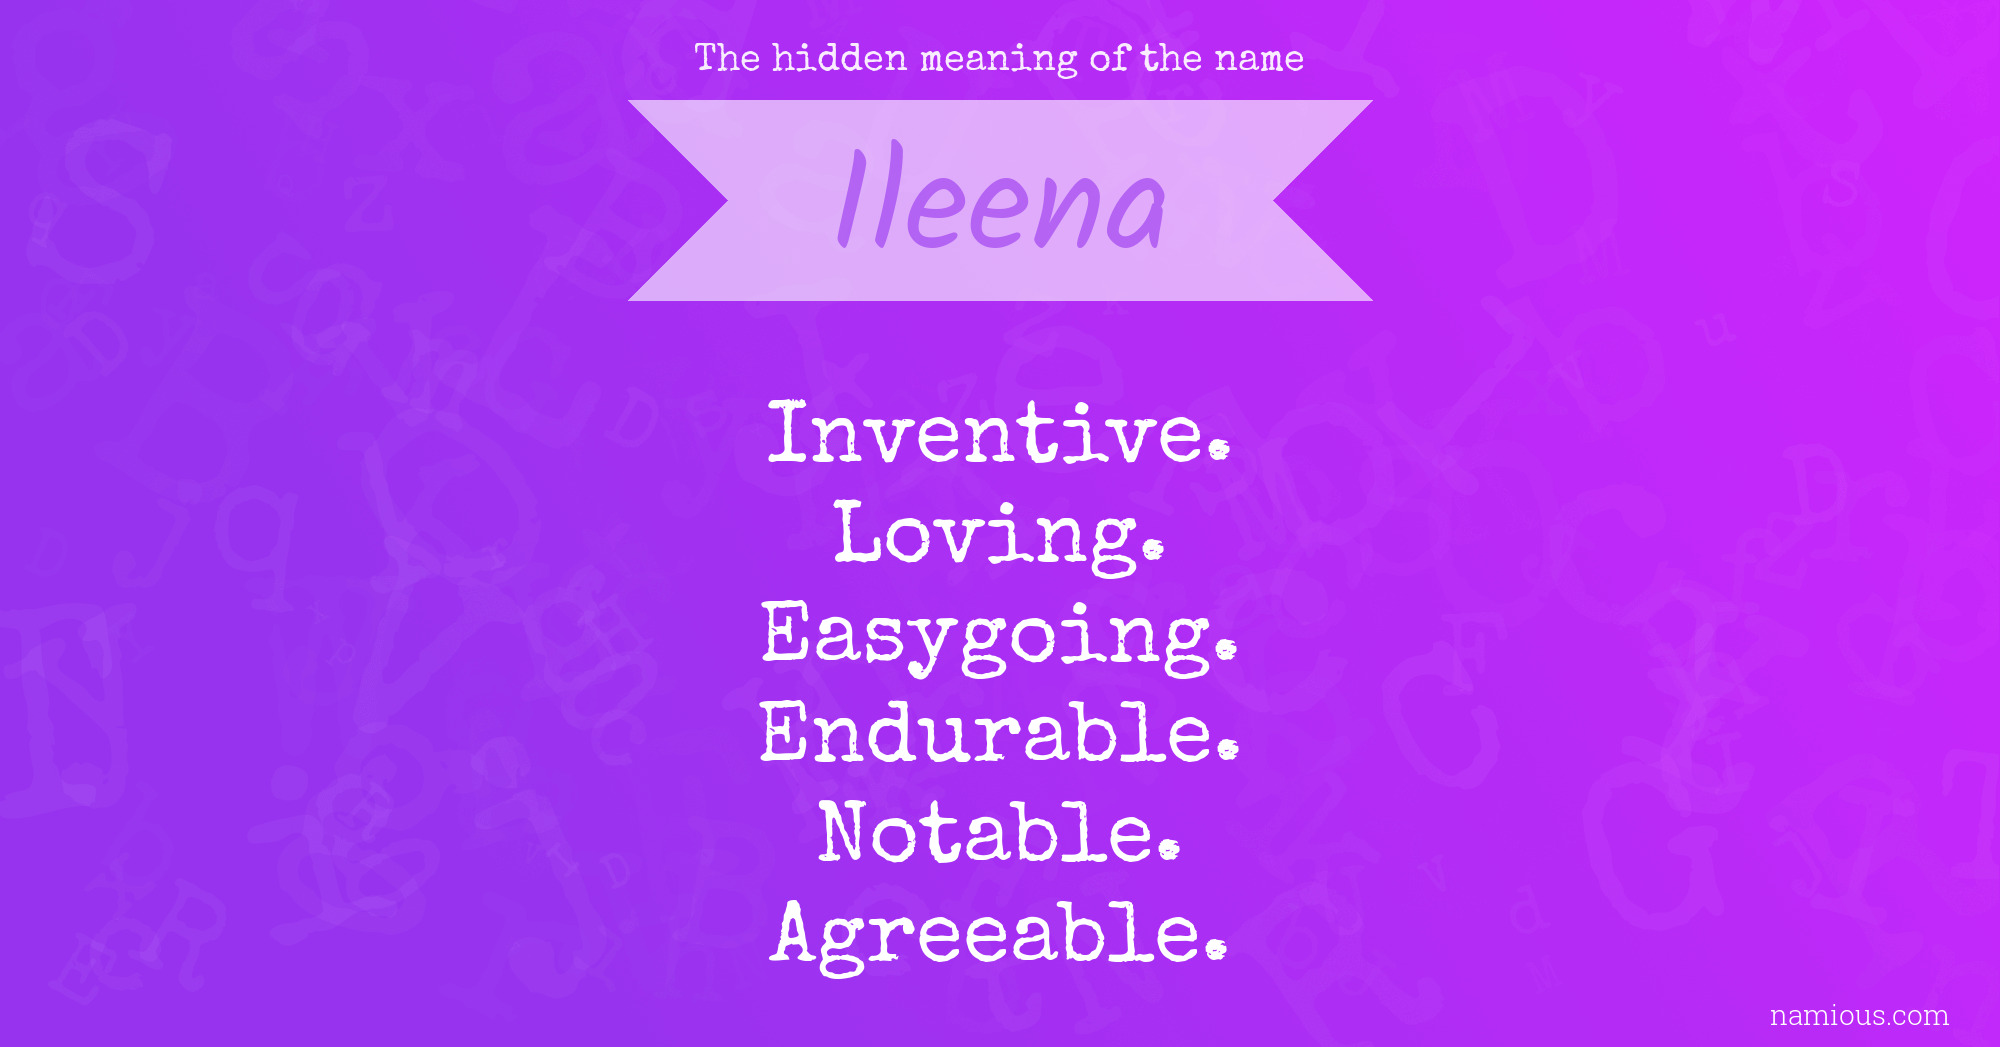 The hidden meaning of the name Ileena